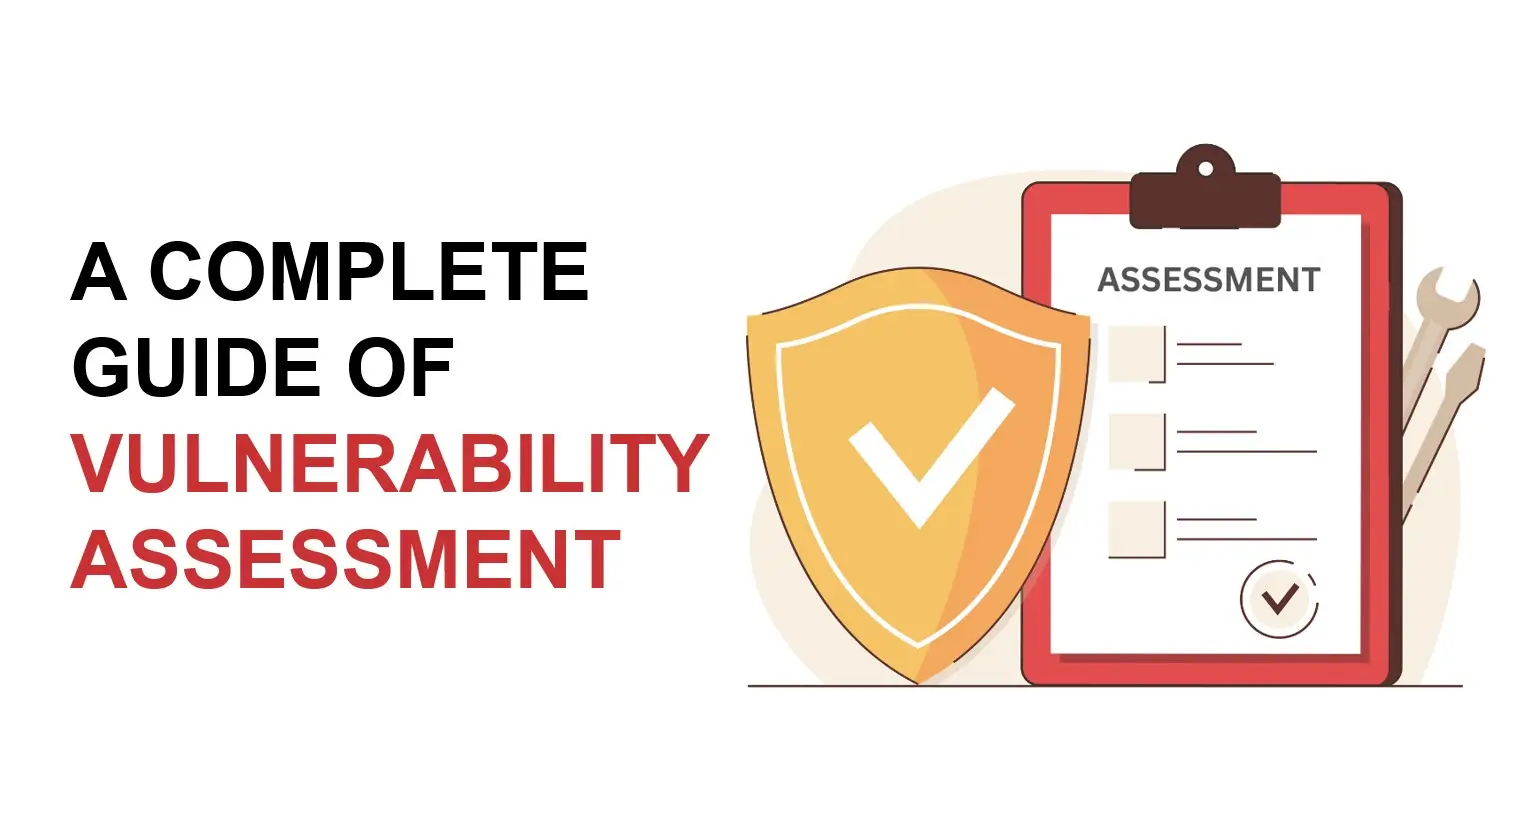 A Complete Guide Of Vulnerability Assessment